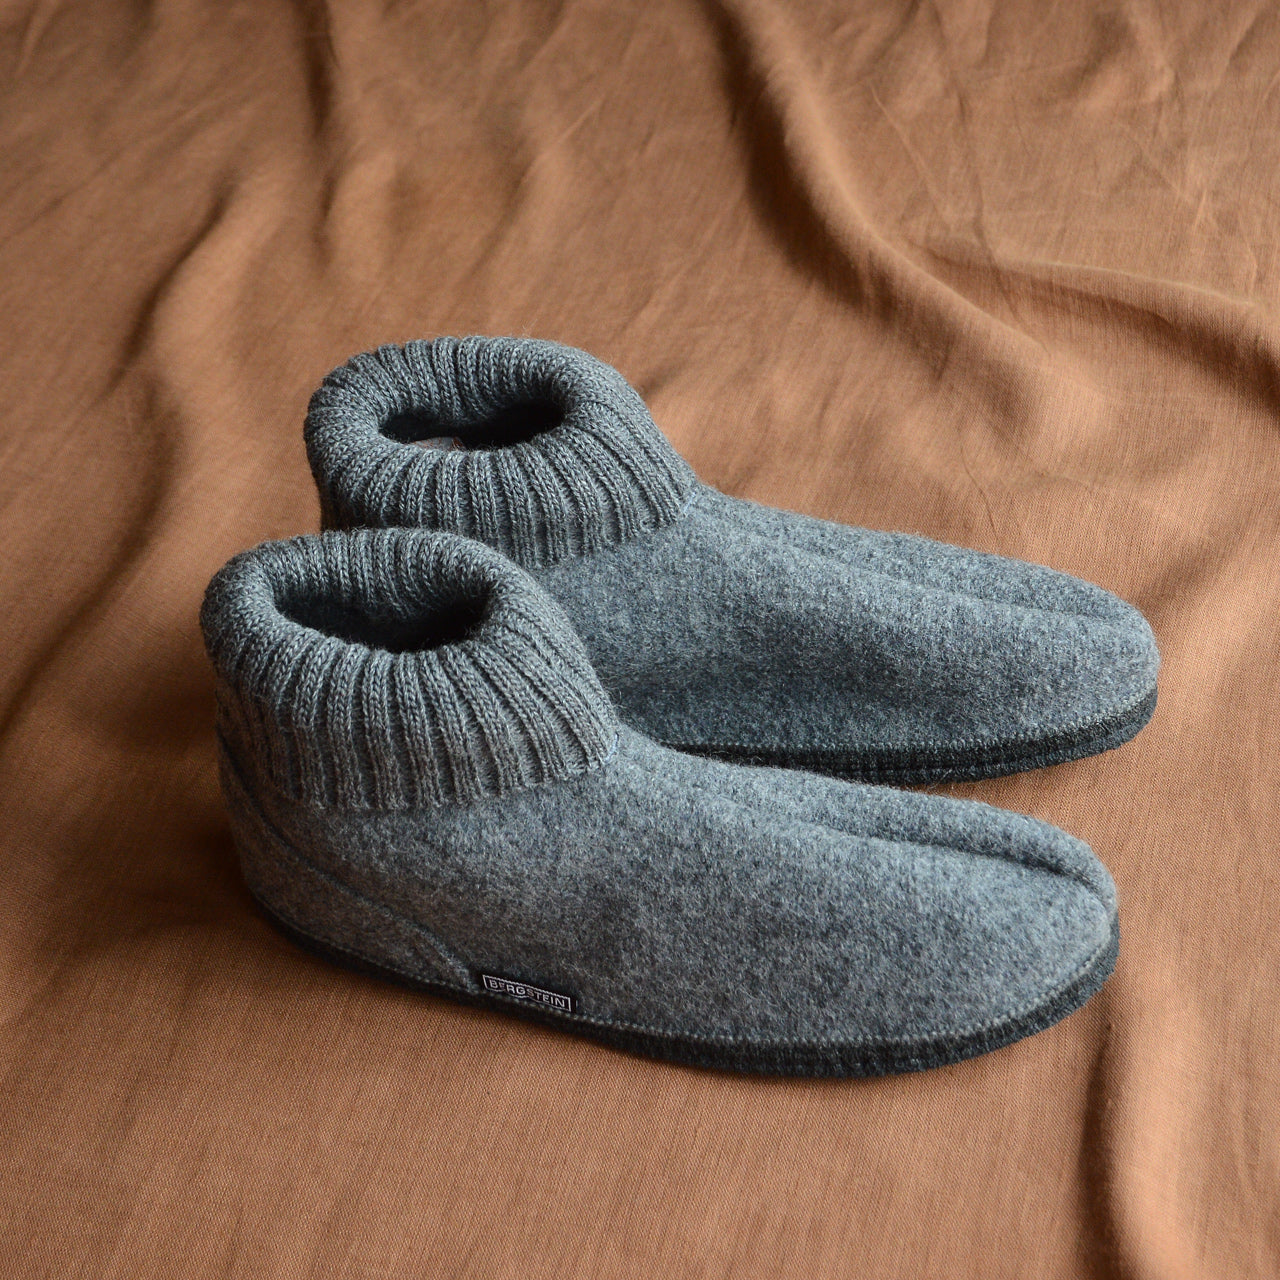 Boiled wool slippers from the DUAL NATURAL collection by Wooppers